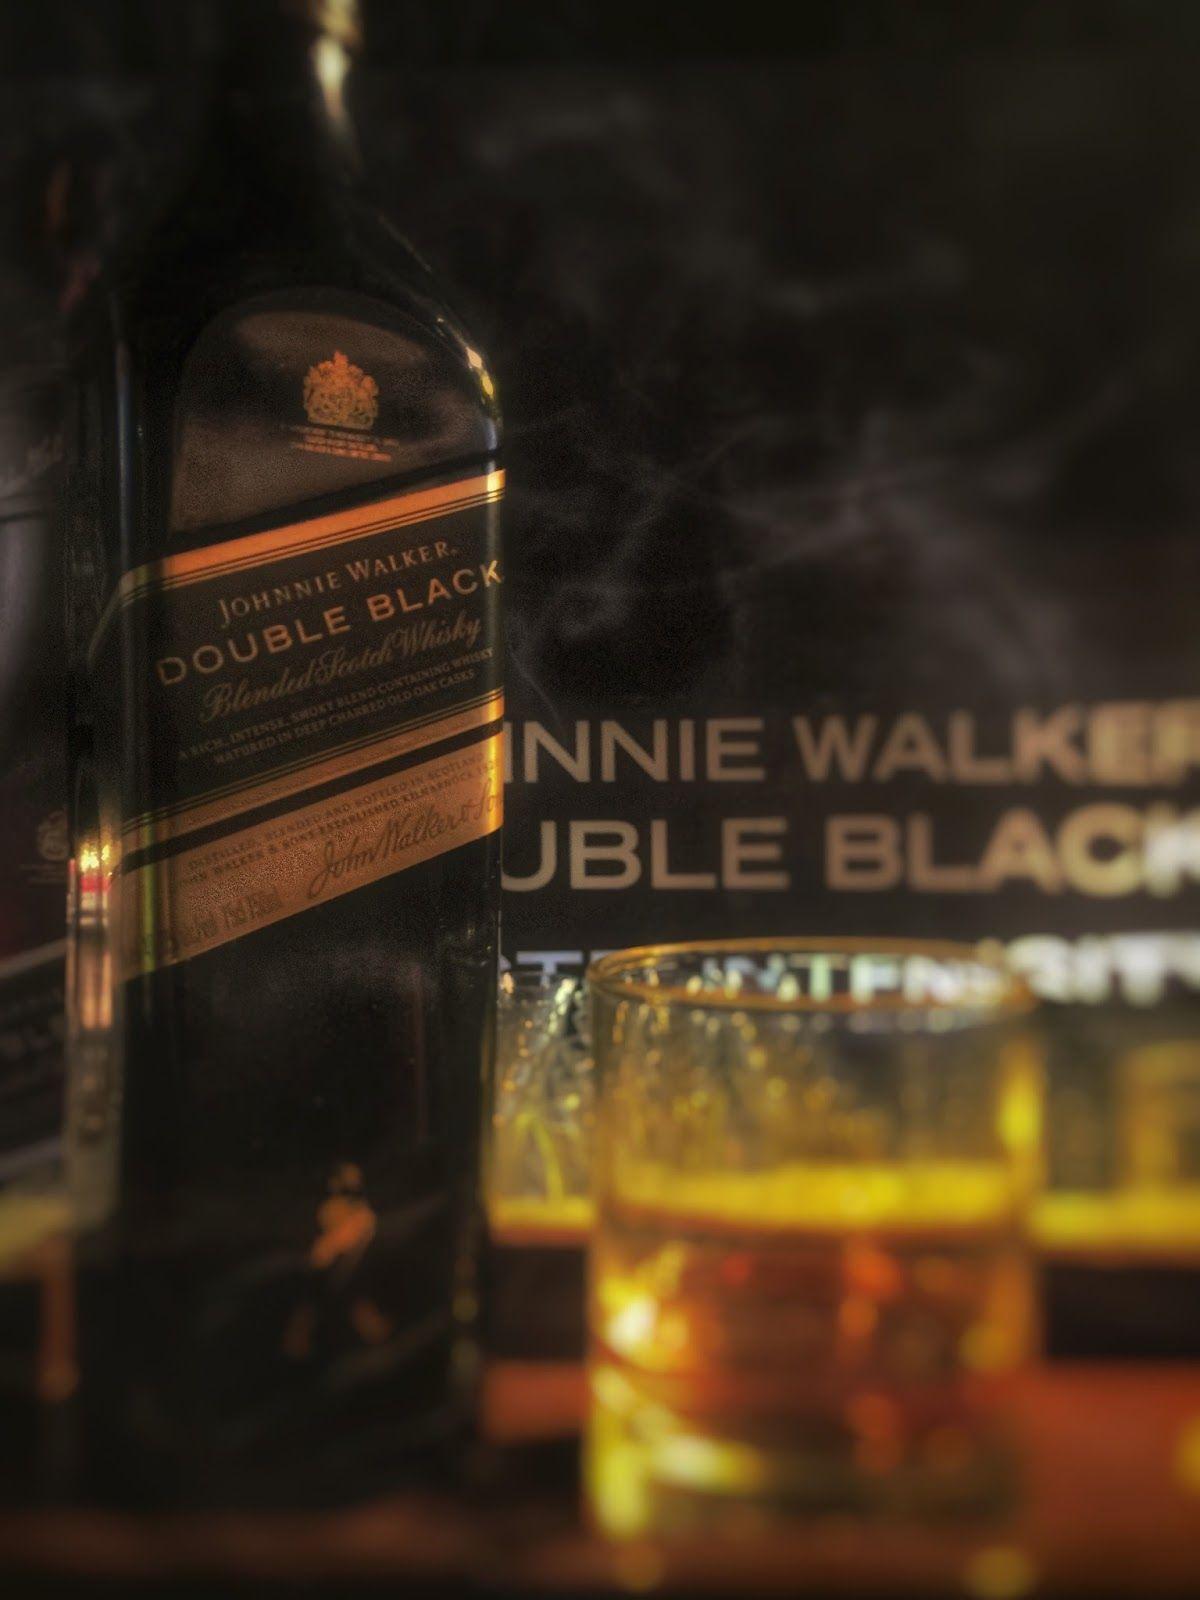 Review of Restaurants: Johnny Walker Double Black Whisky Experience